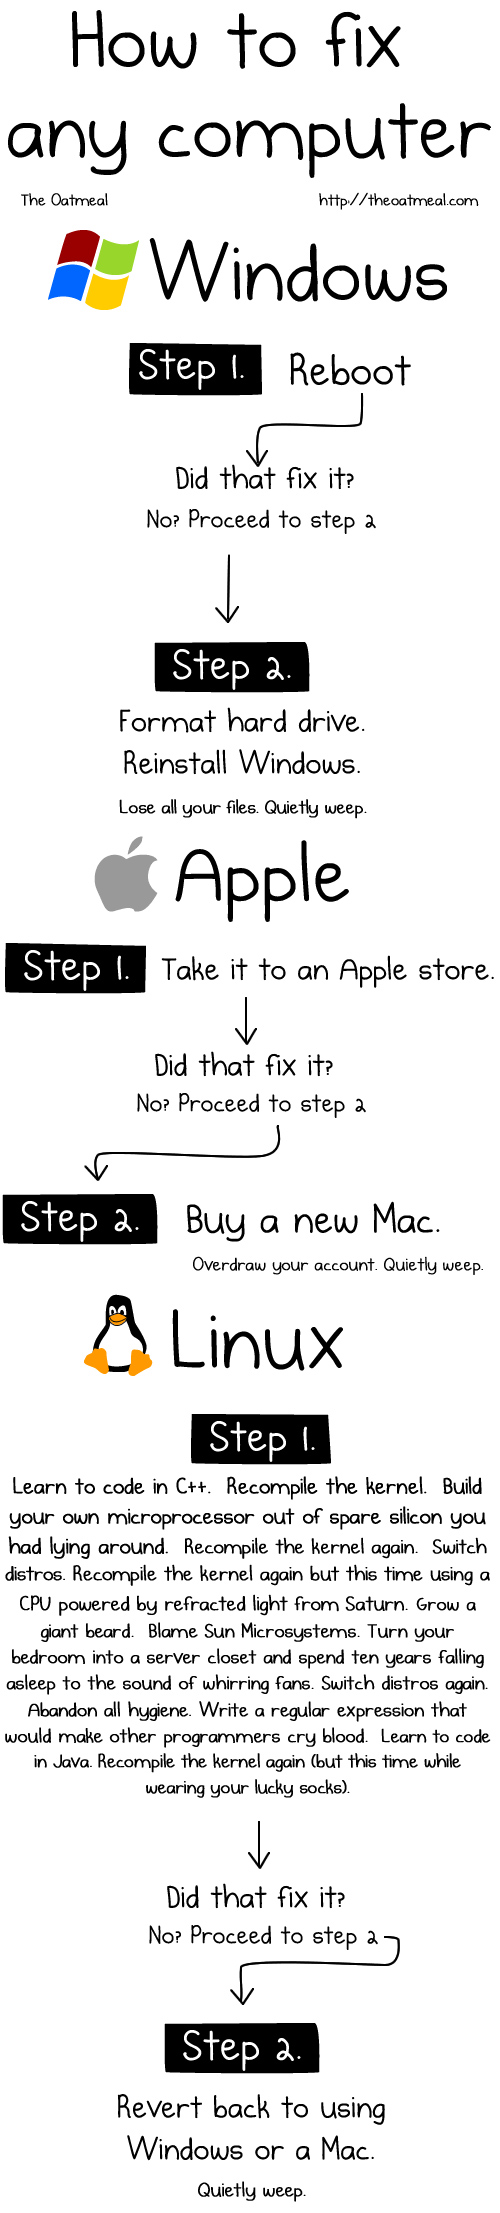 How to fix any computer.